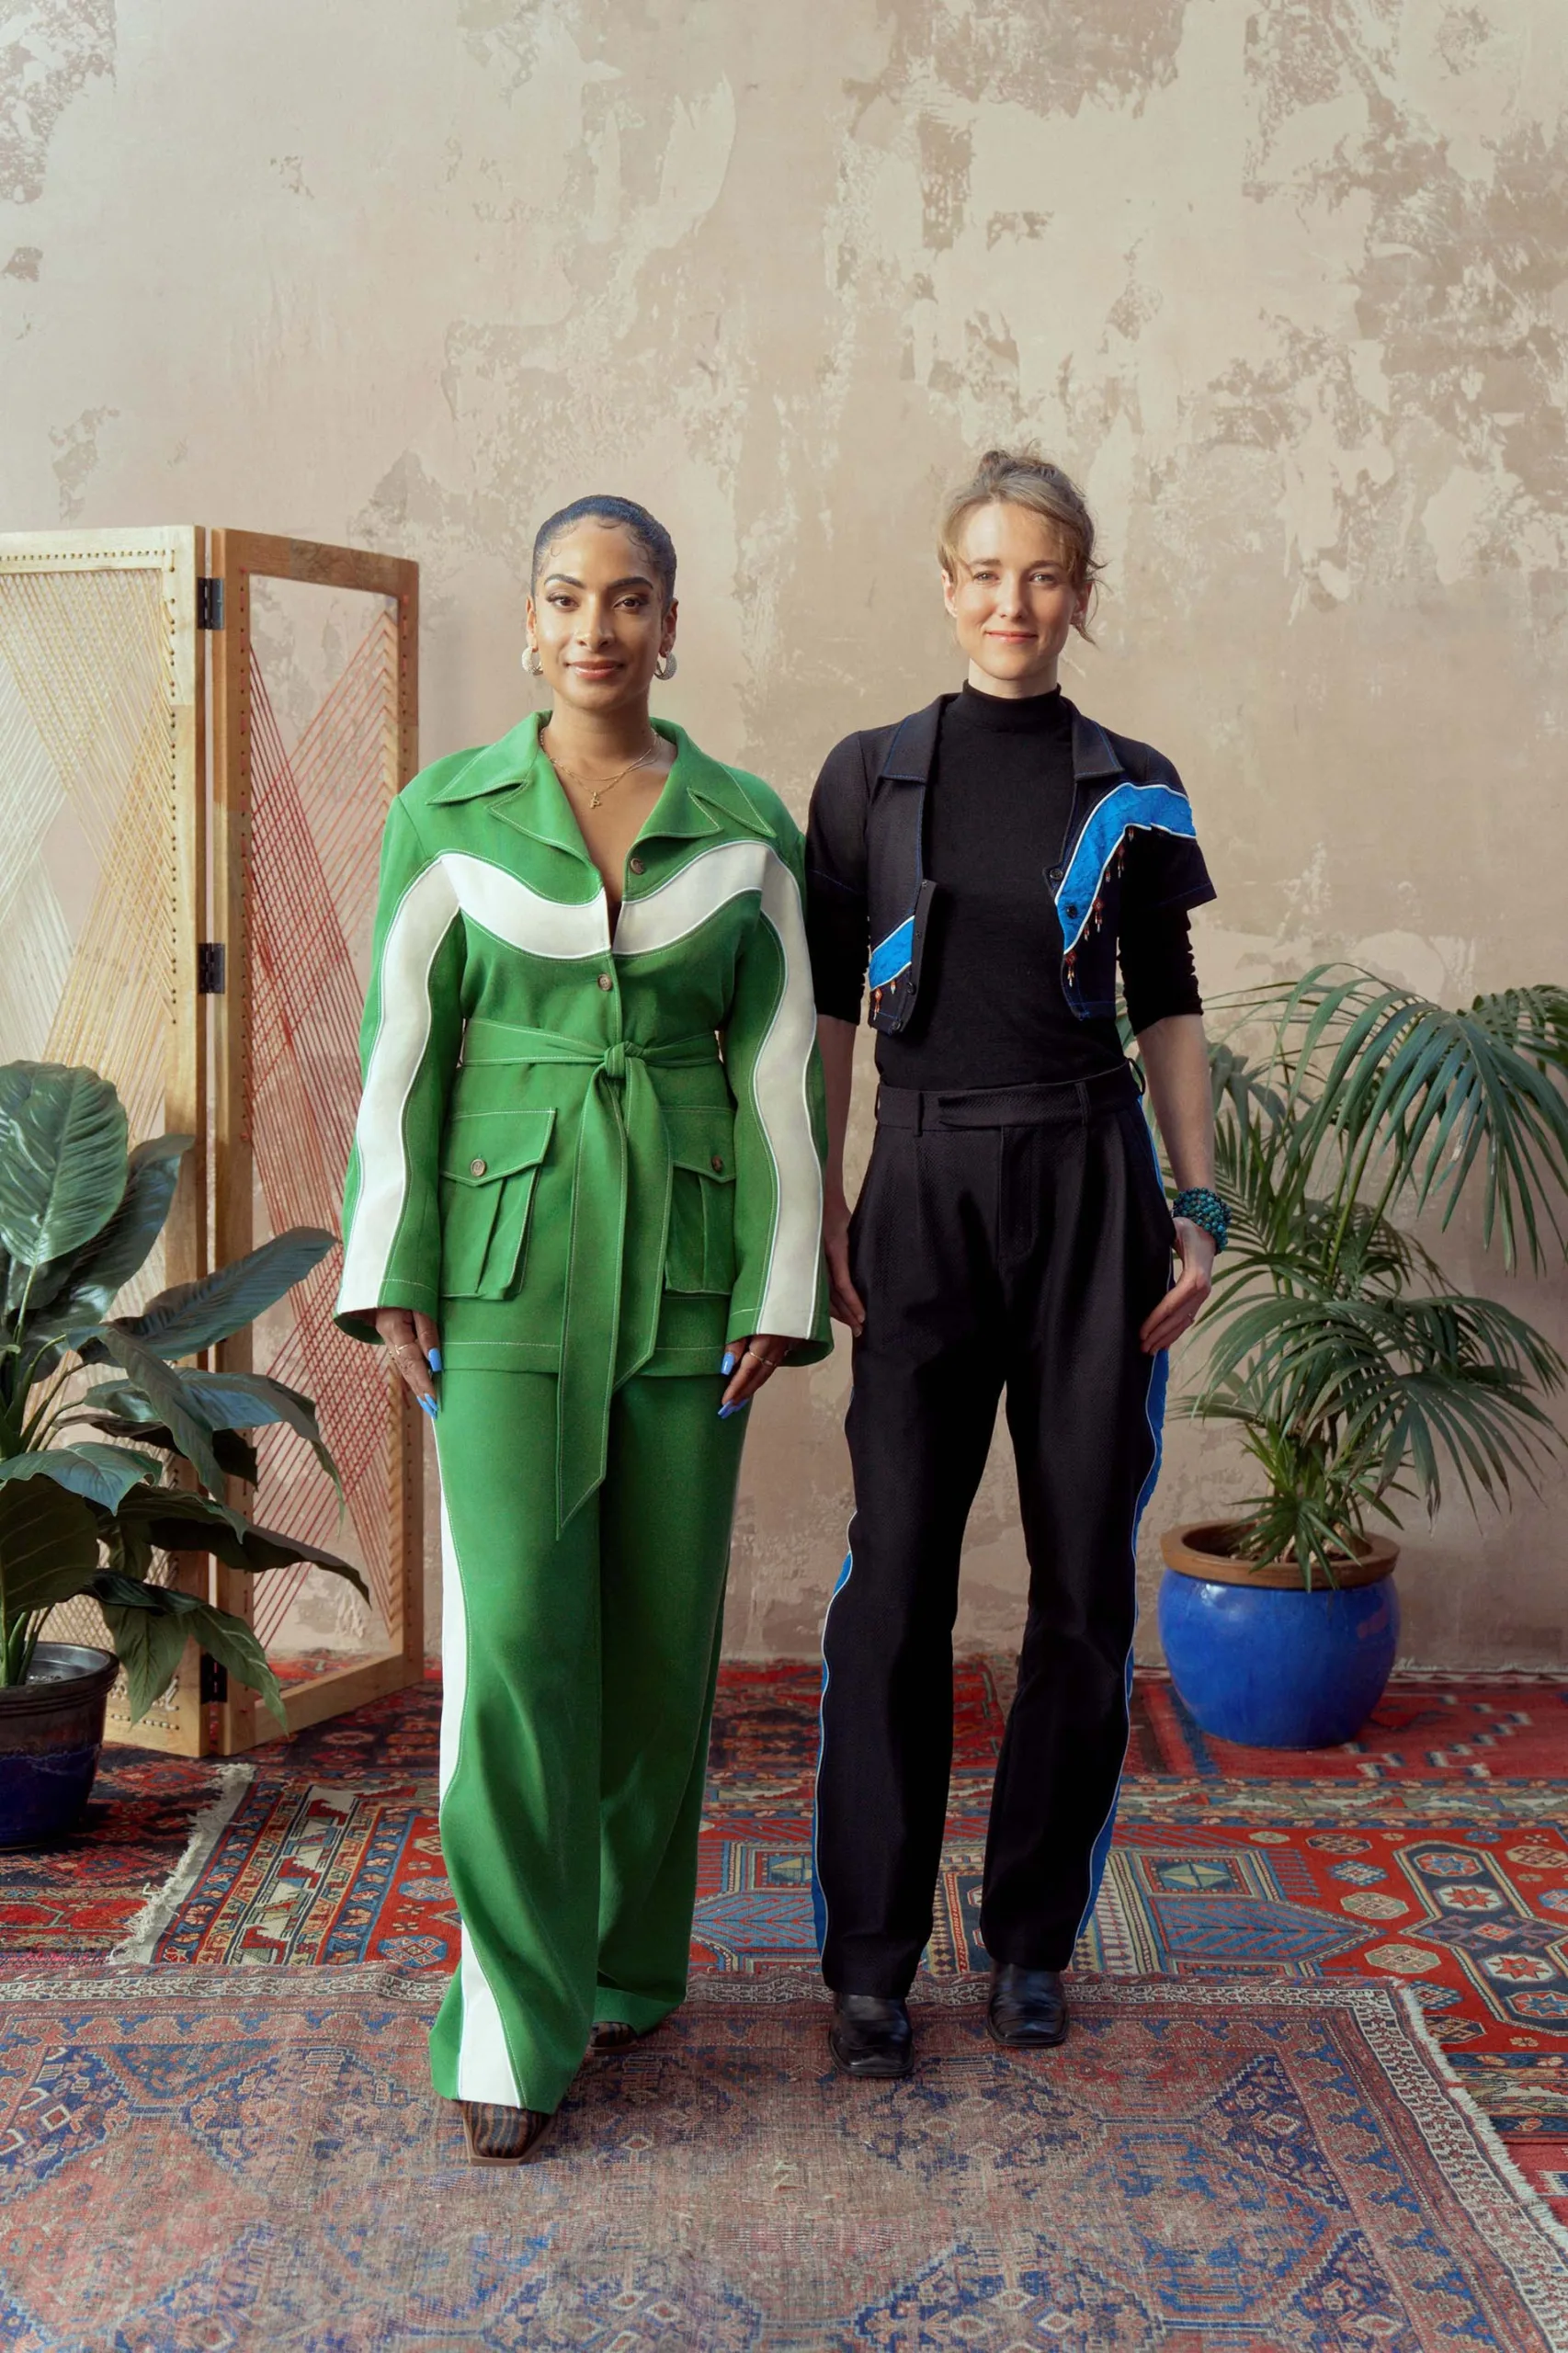 Two women standing next to each other in green and blue outfits.